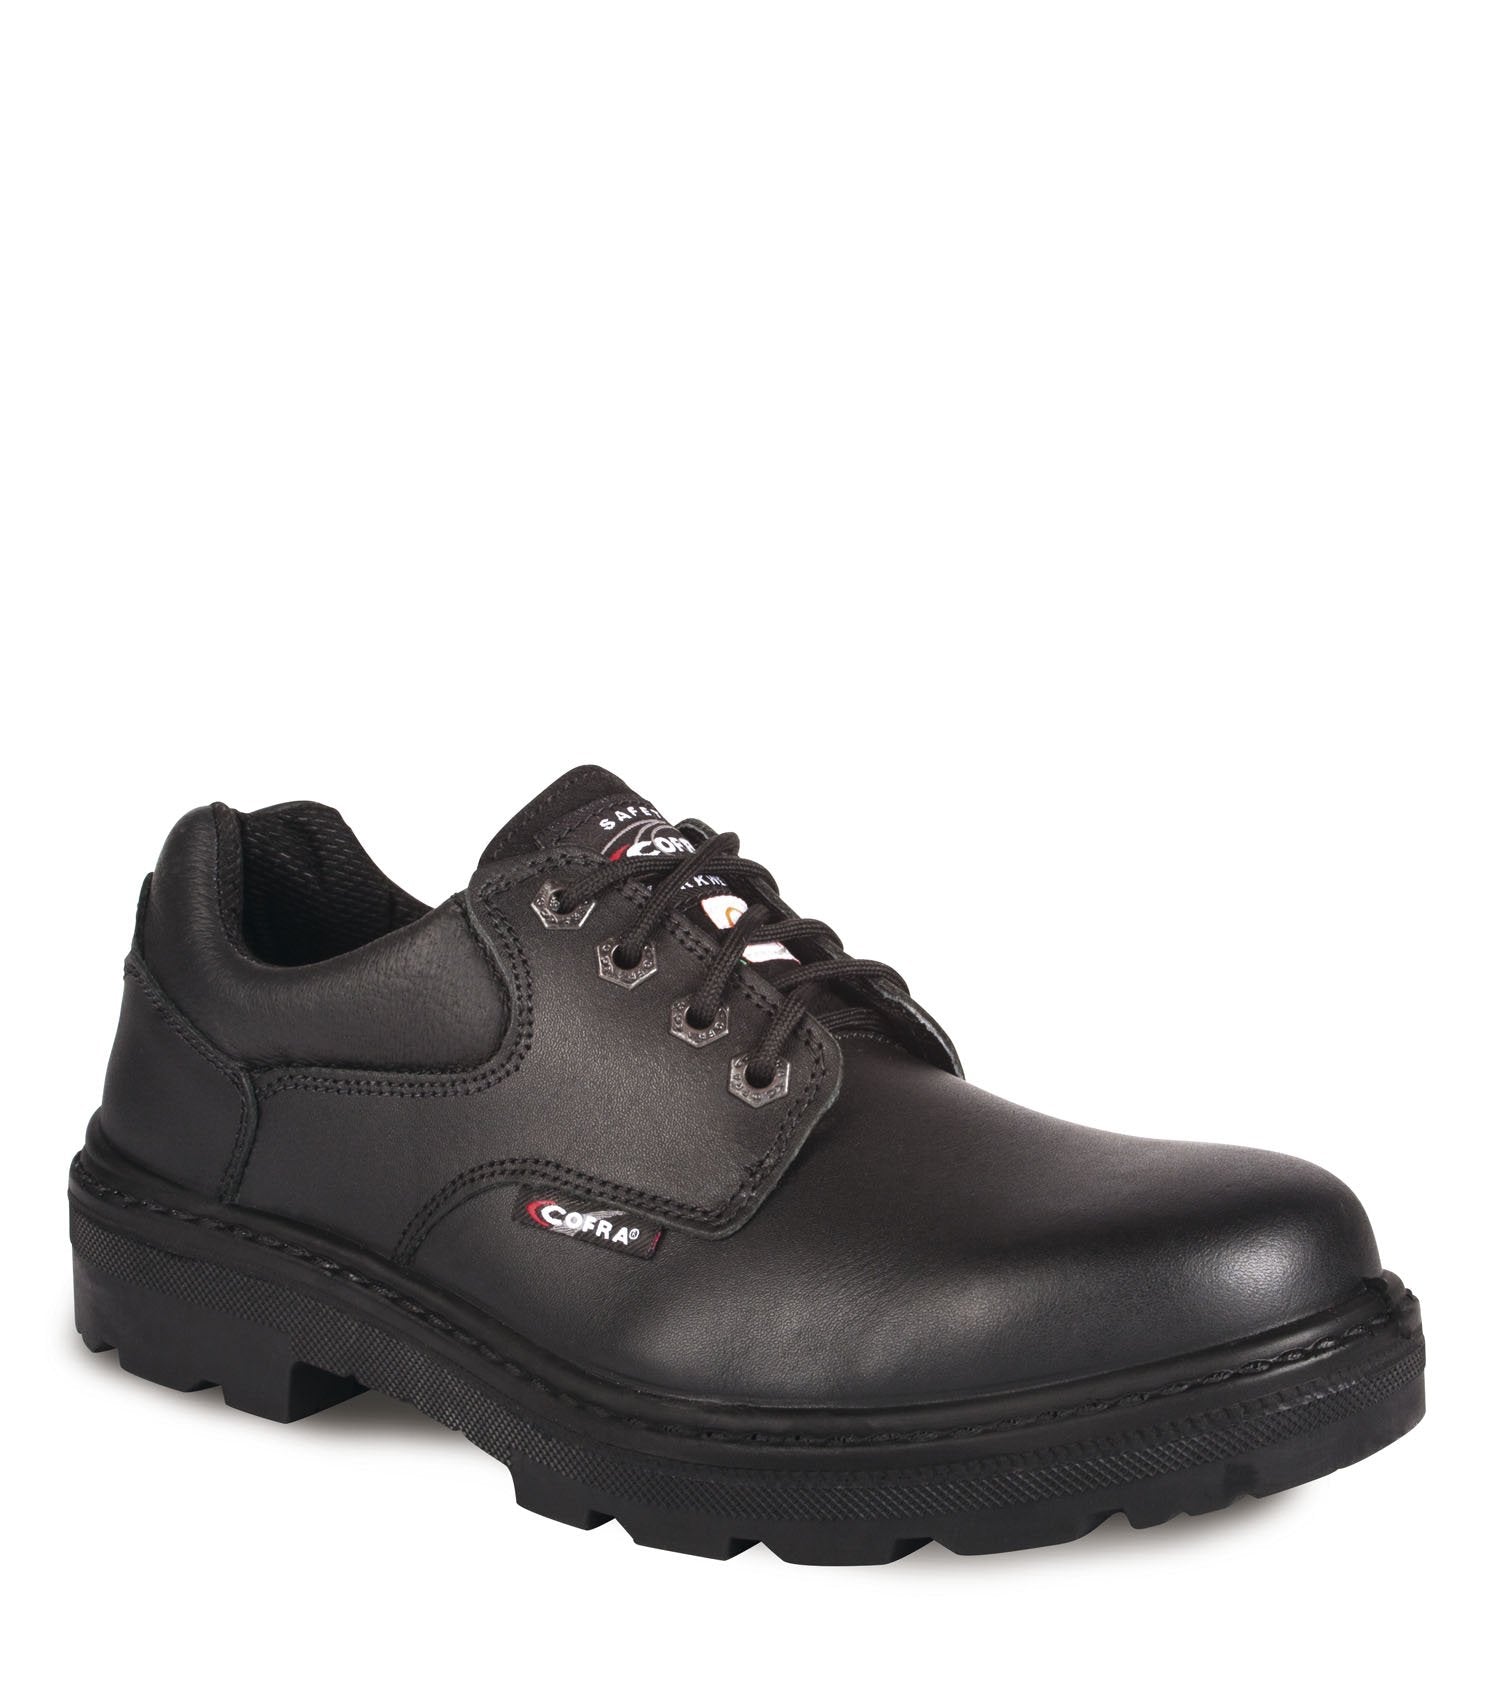 Cofra Small Black Leather Safety Shoes | Limited Size Selection Work Boots - Cleanflow